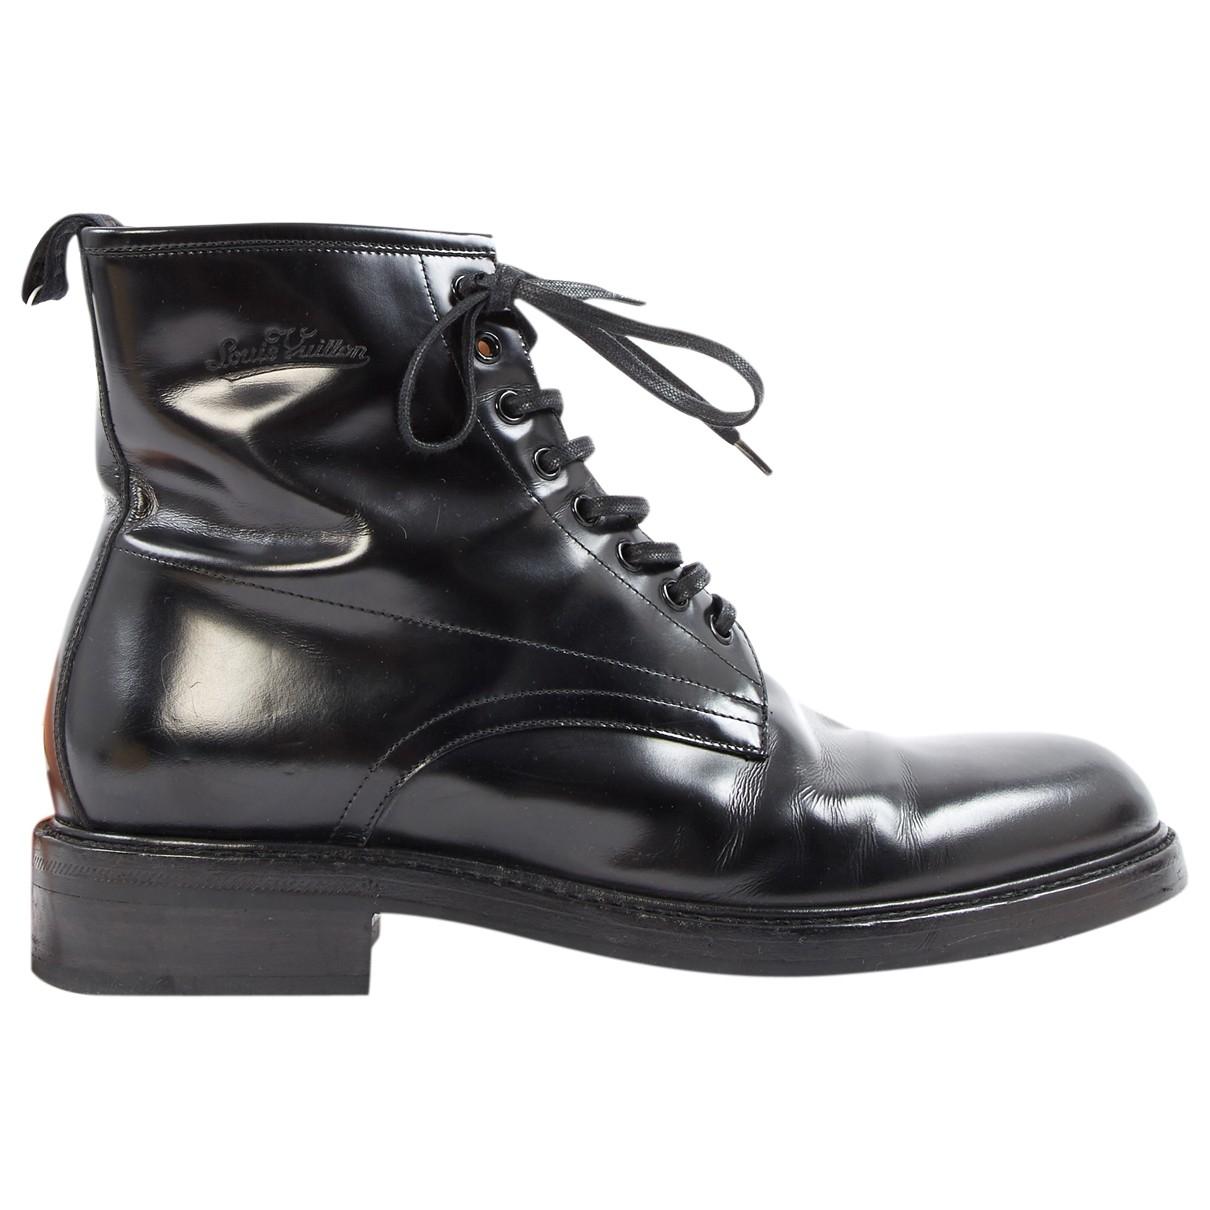 Louis Vuitton Leather Boots in Black for Men - Lyst